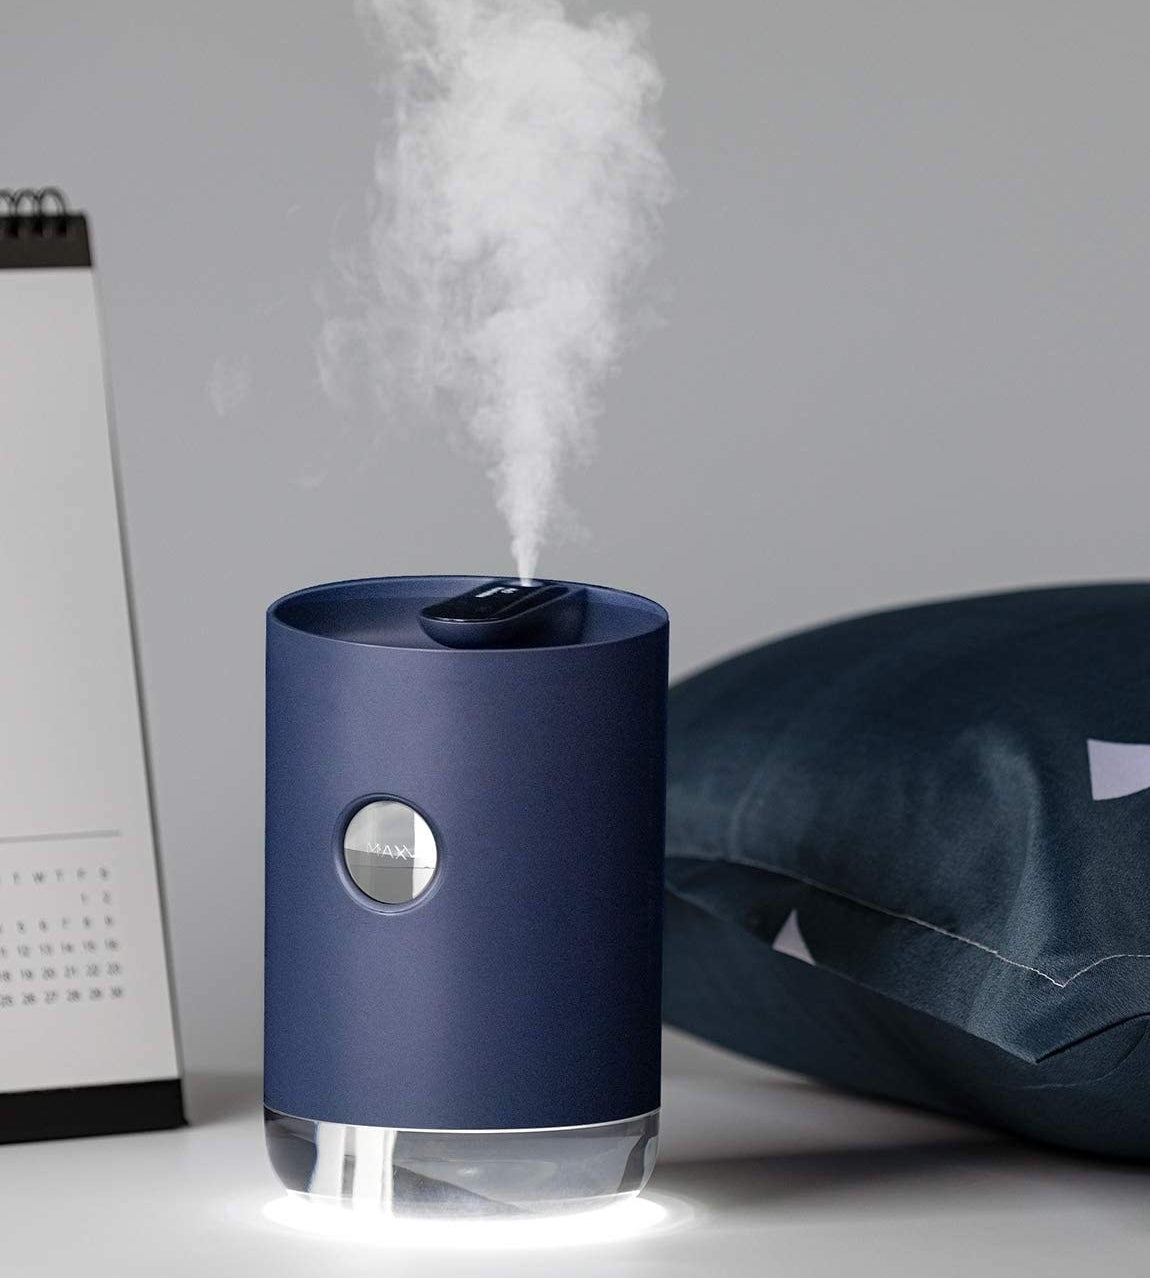 The mini humidifier next to a pillow and calendar